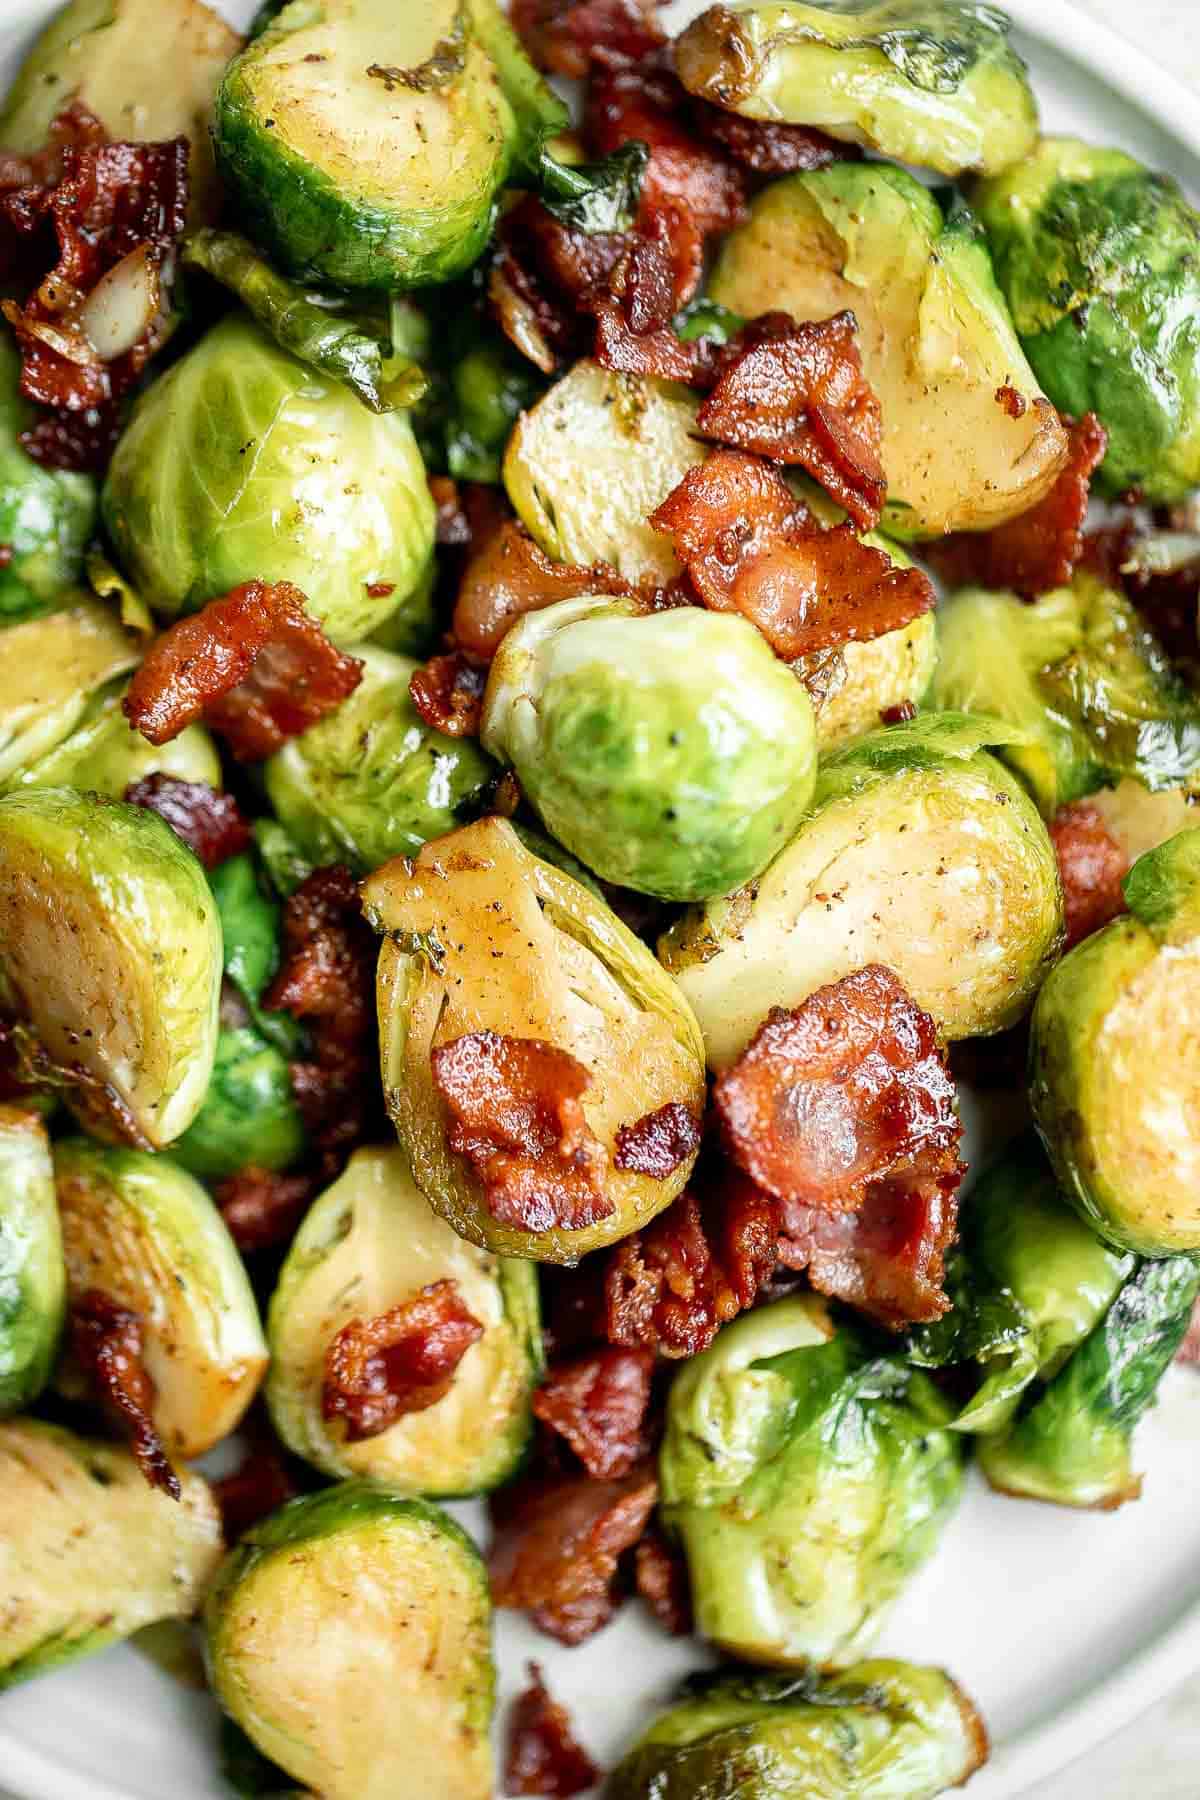 Brussels Sprouts with Bacon is a quick and easy side dish with the best flavor and texture. The best part? This holiday side is ready in under 15 minutes. | aheadofthyme.com